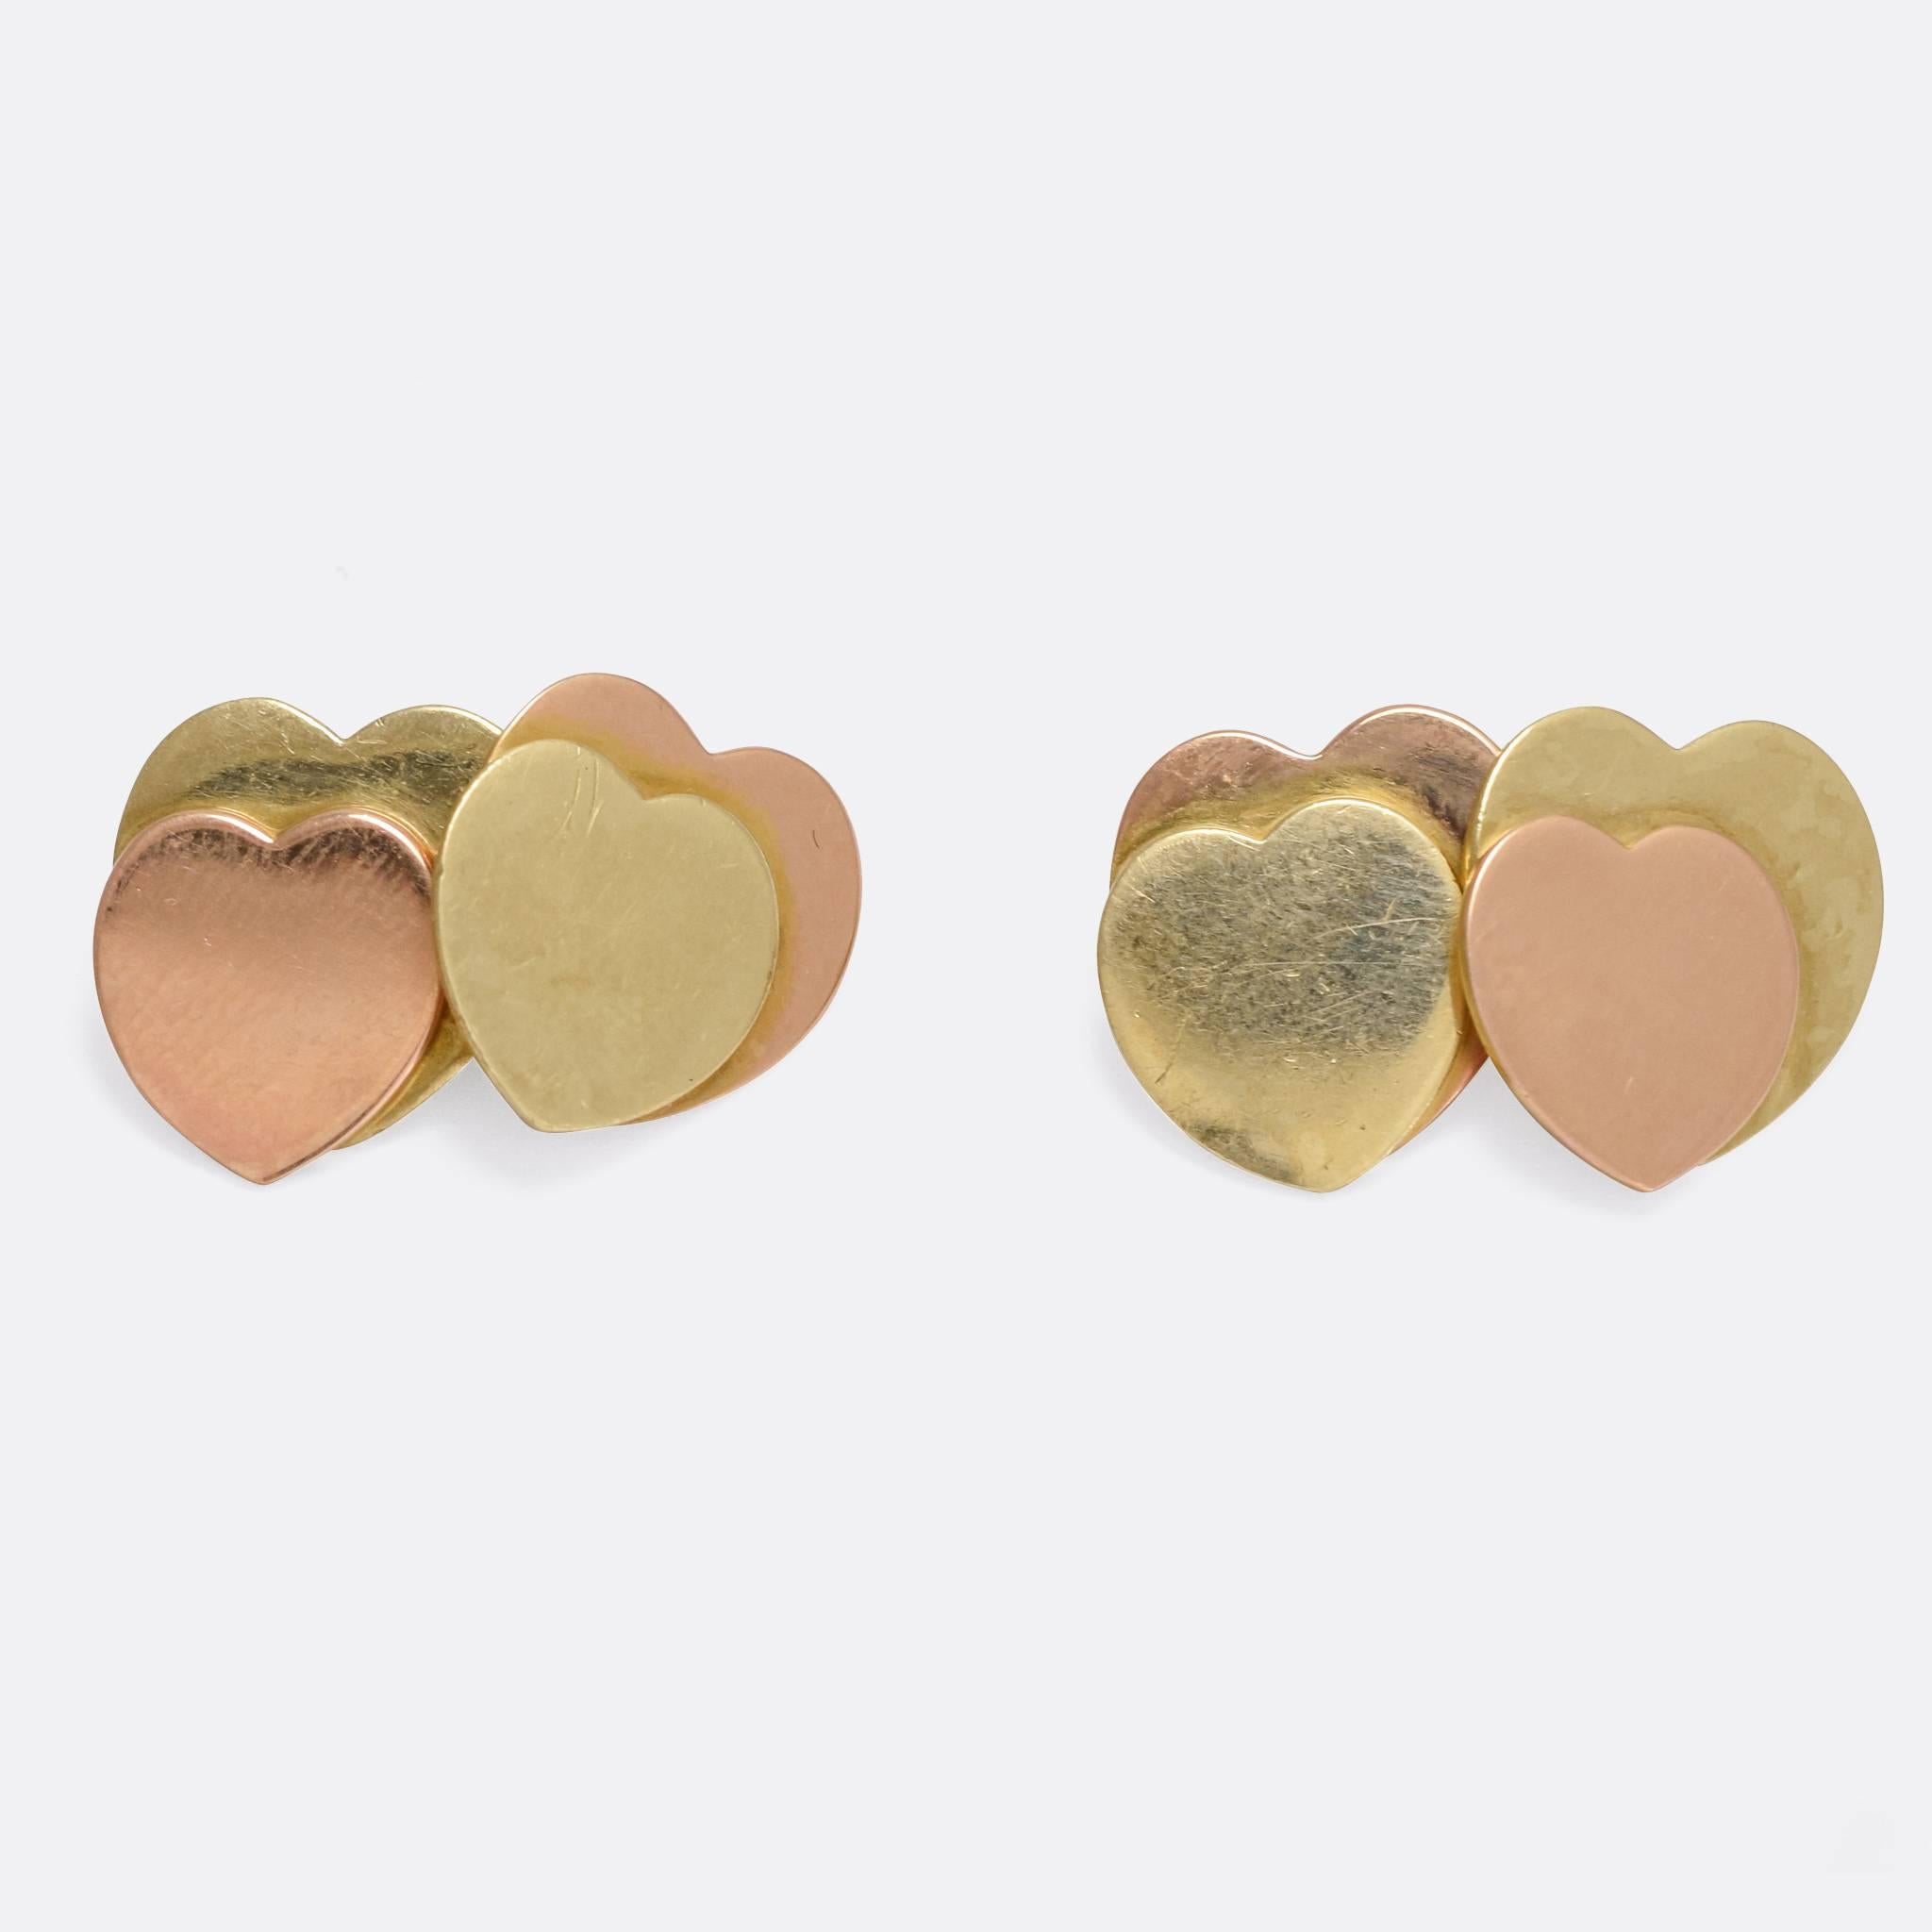 A particularly lovely pair of vintage double-panel cufflinks, with each panel modelled as two hearts - one in rose gold, the other in yellow gold. They would make a sweet and romantic gift; they're high quality and crafted from 18 karat gold